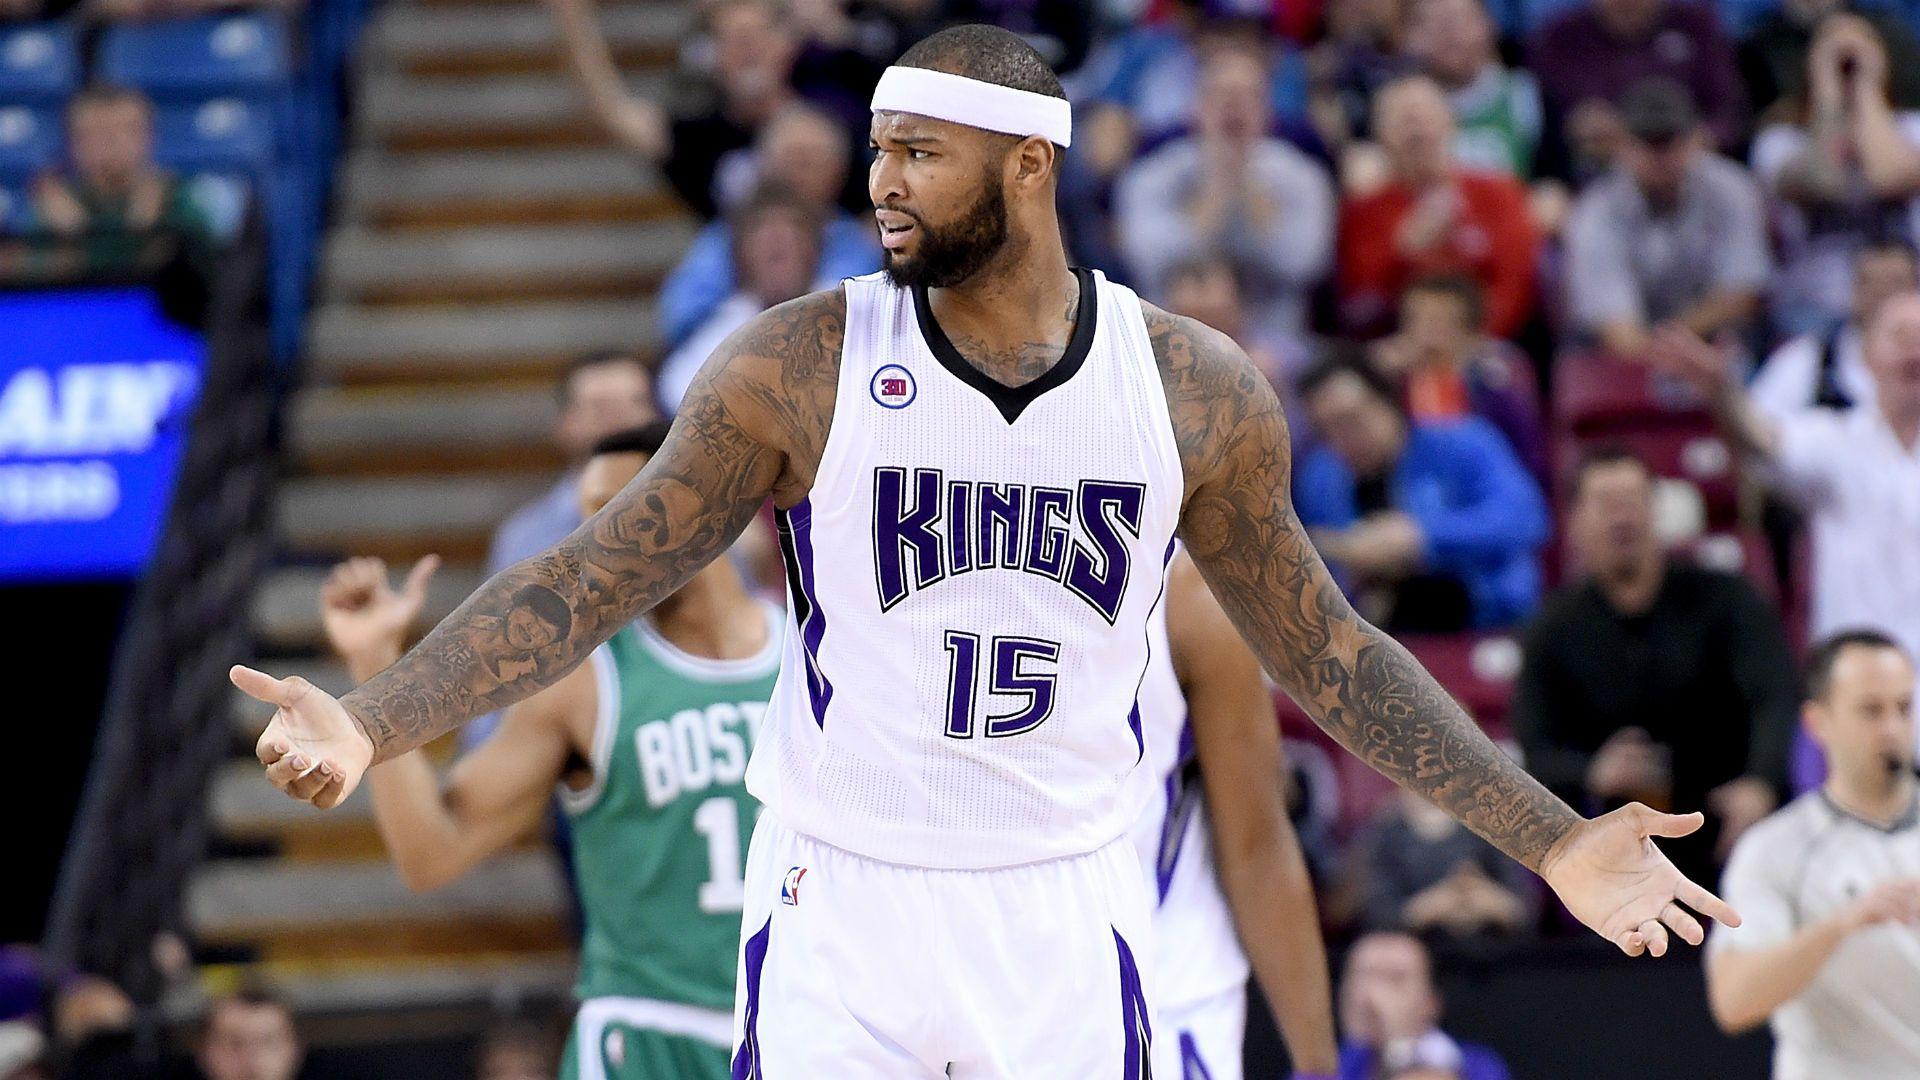 DeMarcus Cousins, Eric Bledsoe combine for 176 points in charity